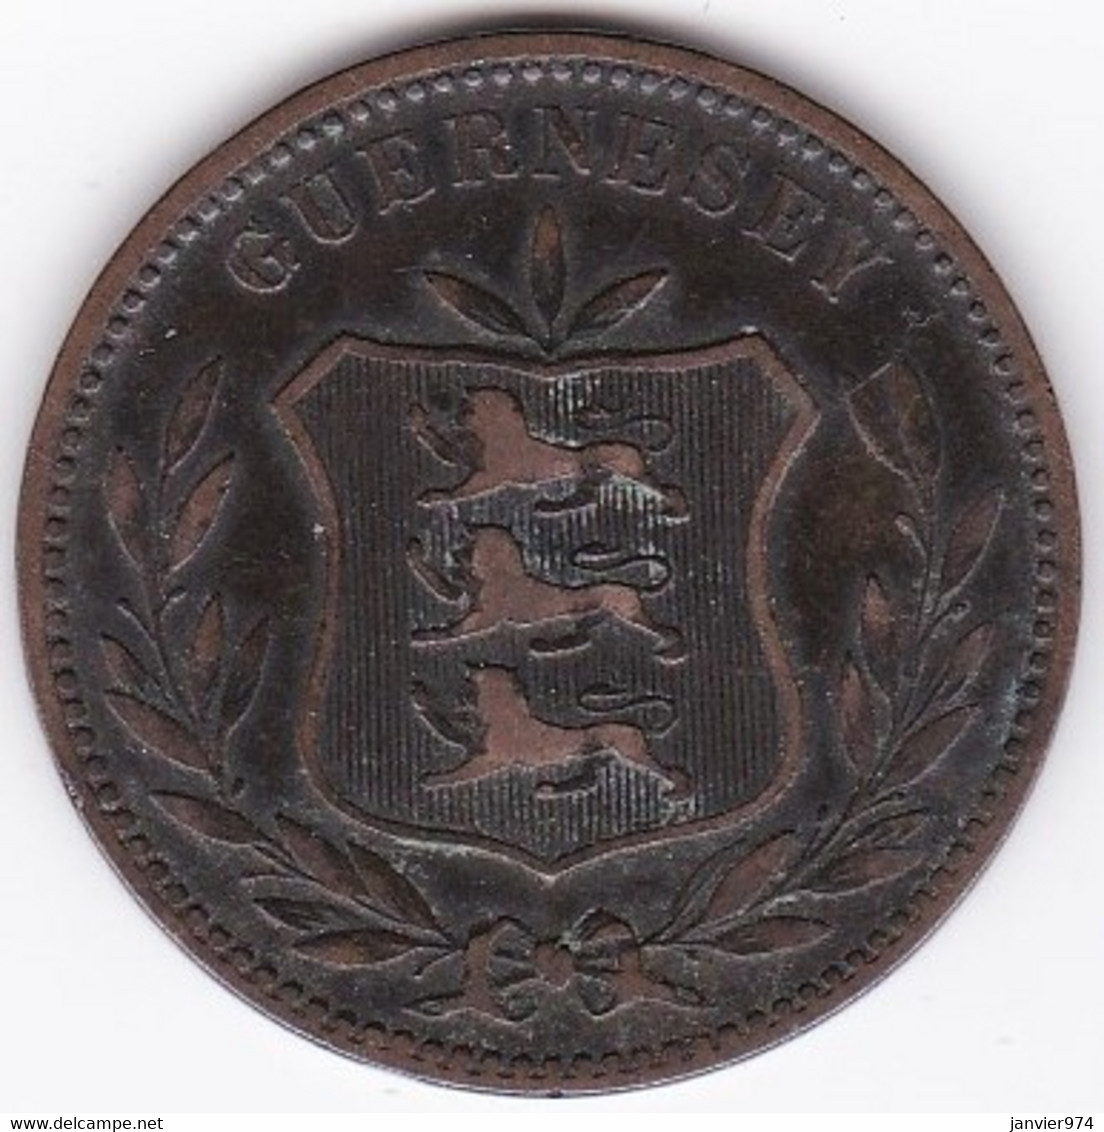 Guernesey 8 Doubles 1889 H. Bronze . KM# 7 - Guernesey